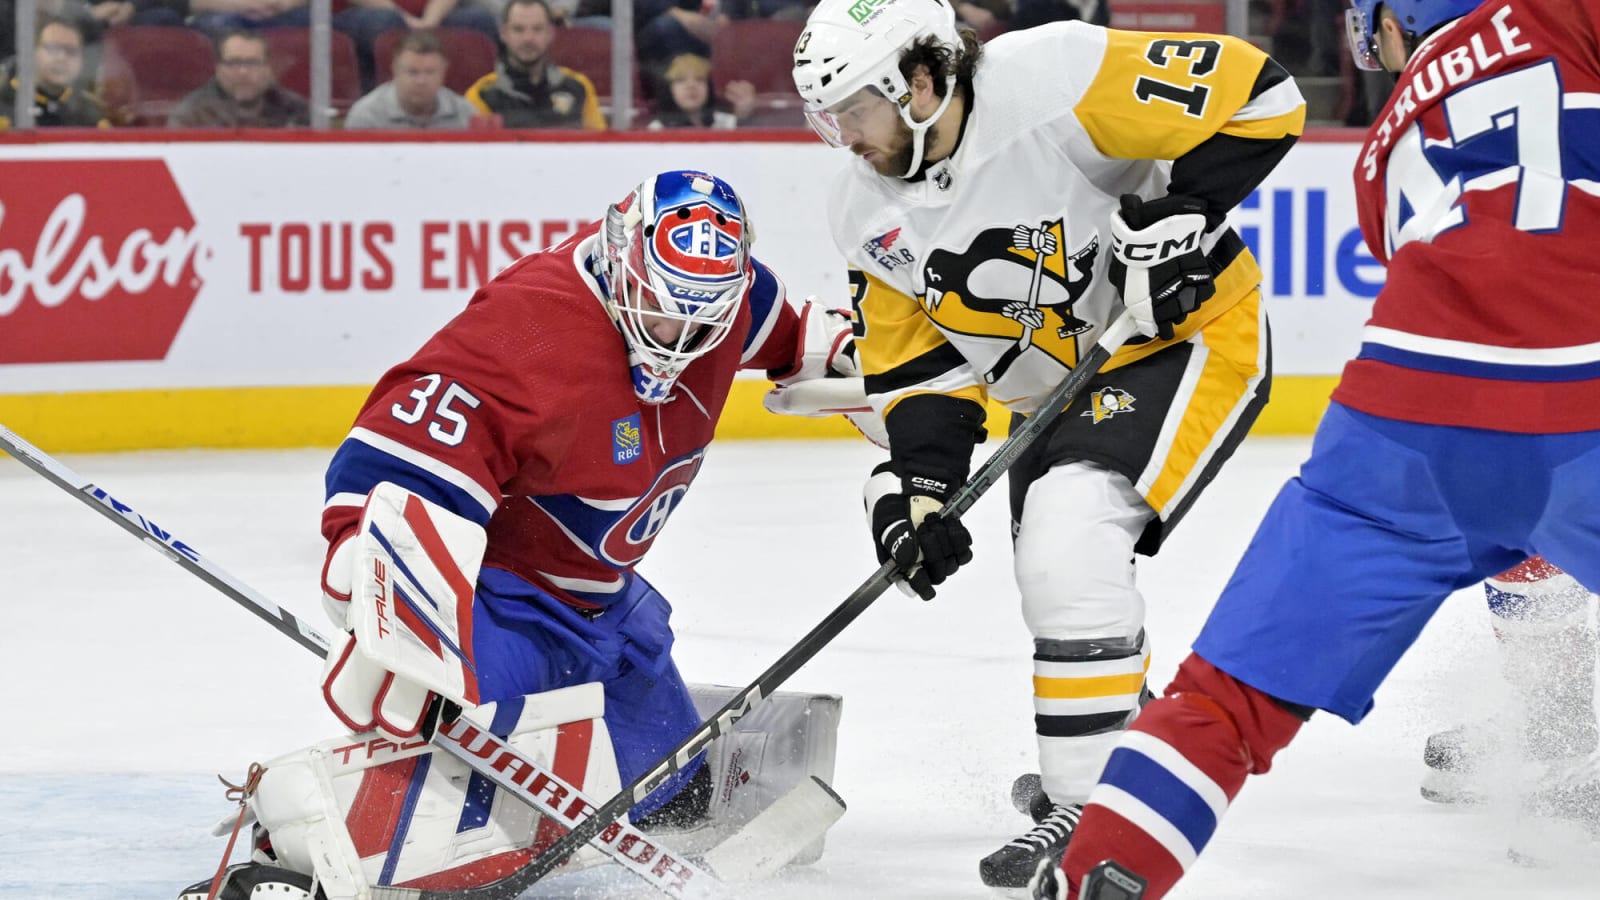 Penguins Assign Shea, Hinostroza to WBS Penguins